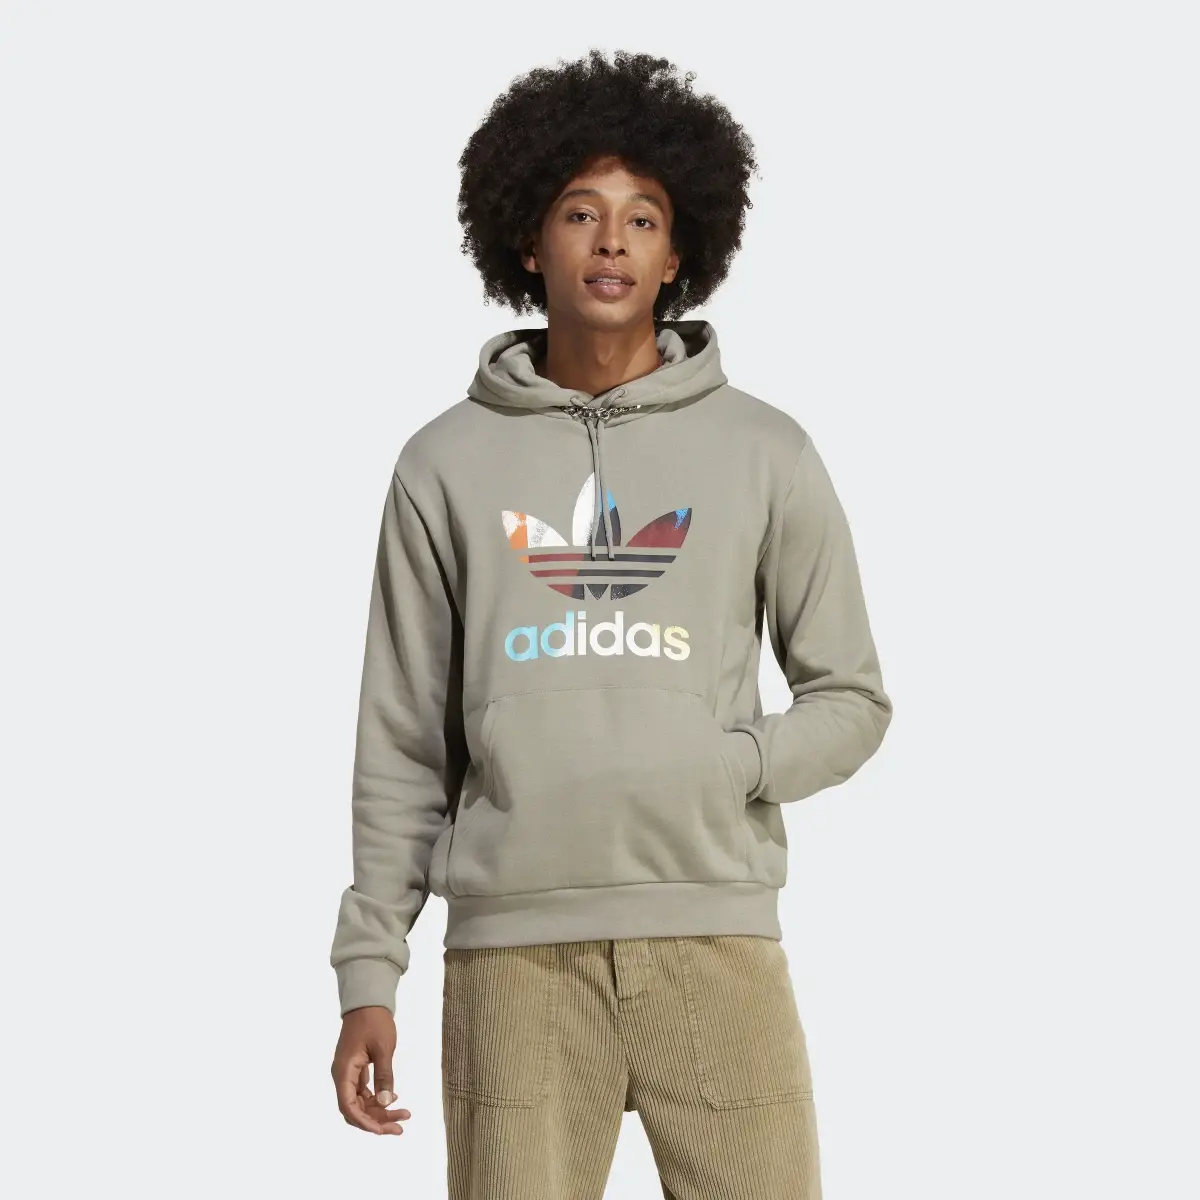 Adidas Graphics off the Grid Hoodie. 2